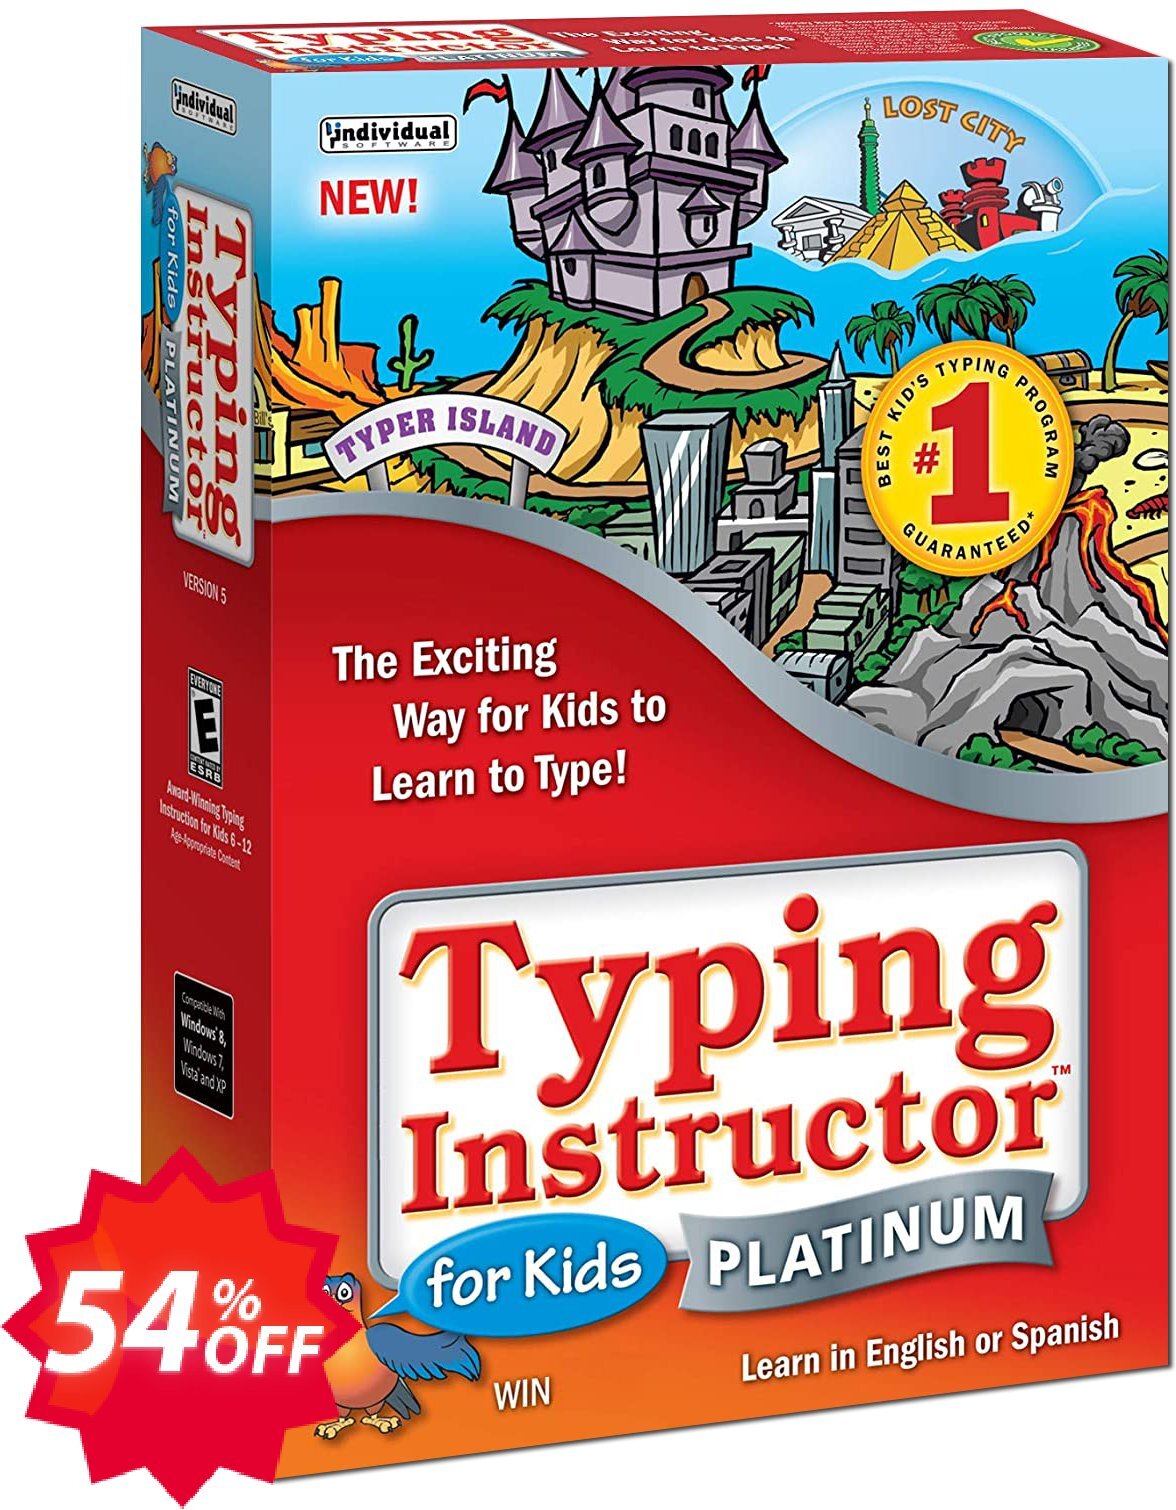 Typing Instructor for Kids Platinum Coupon code 54% discount 